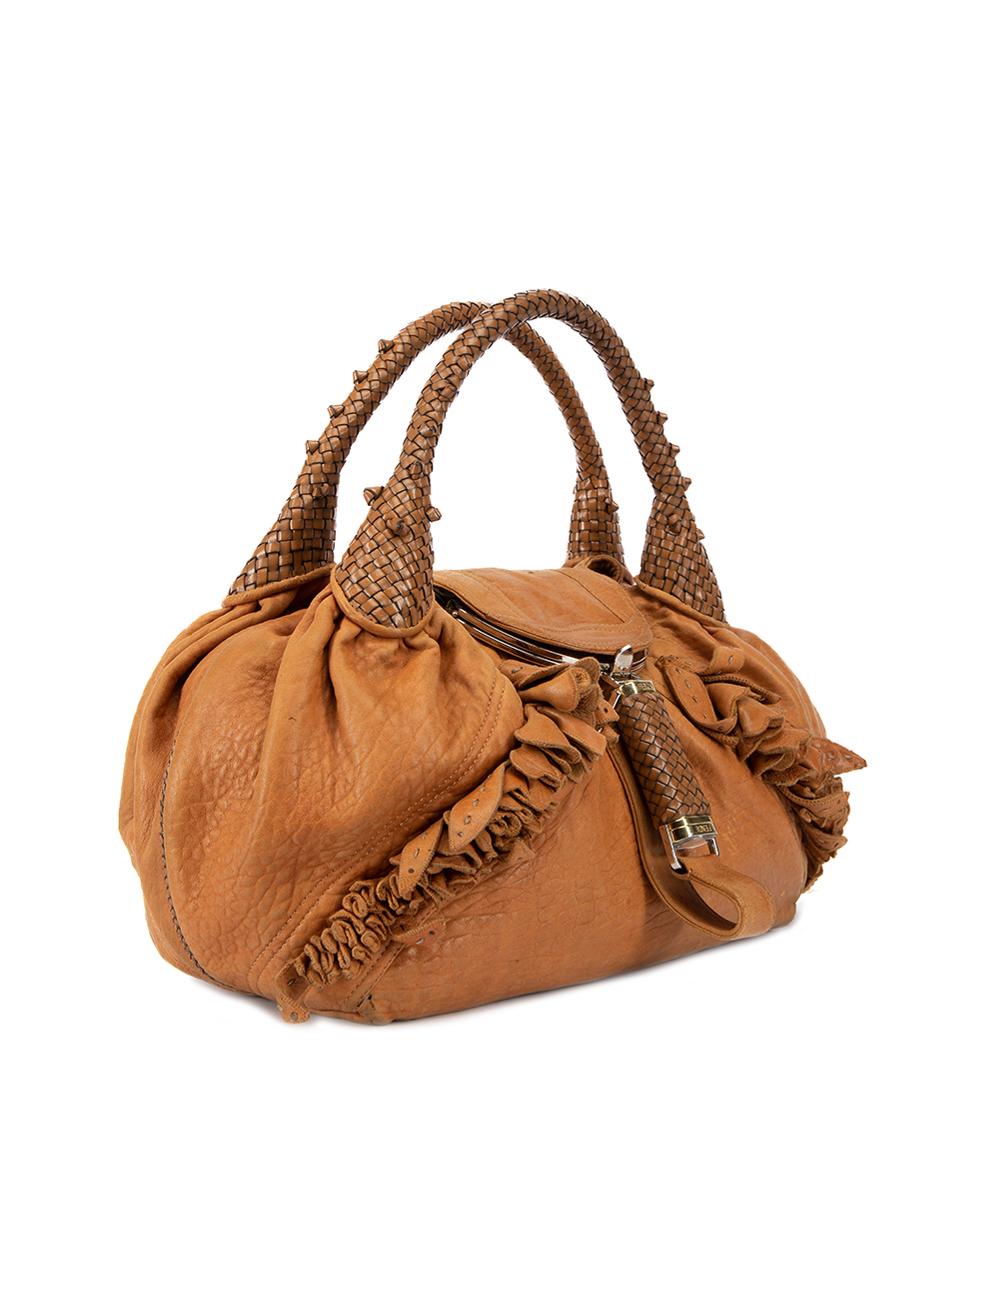 CONDITION is Good. Minor wear to bag is evident. Light wear to the leather exterior which is discoloured, worn down in certain areas and there is a small rip at the bottom of bag on this used Fendi designer resale item. Details Tan Leather Large top